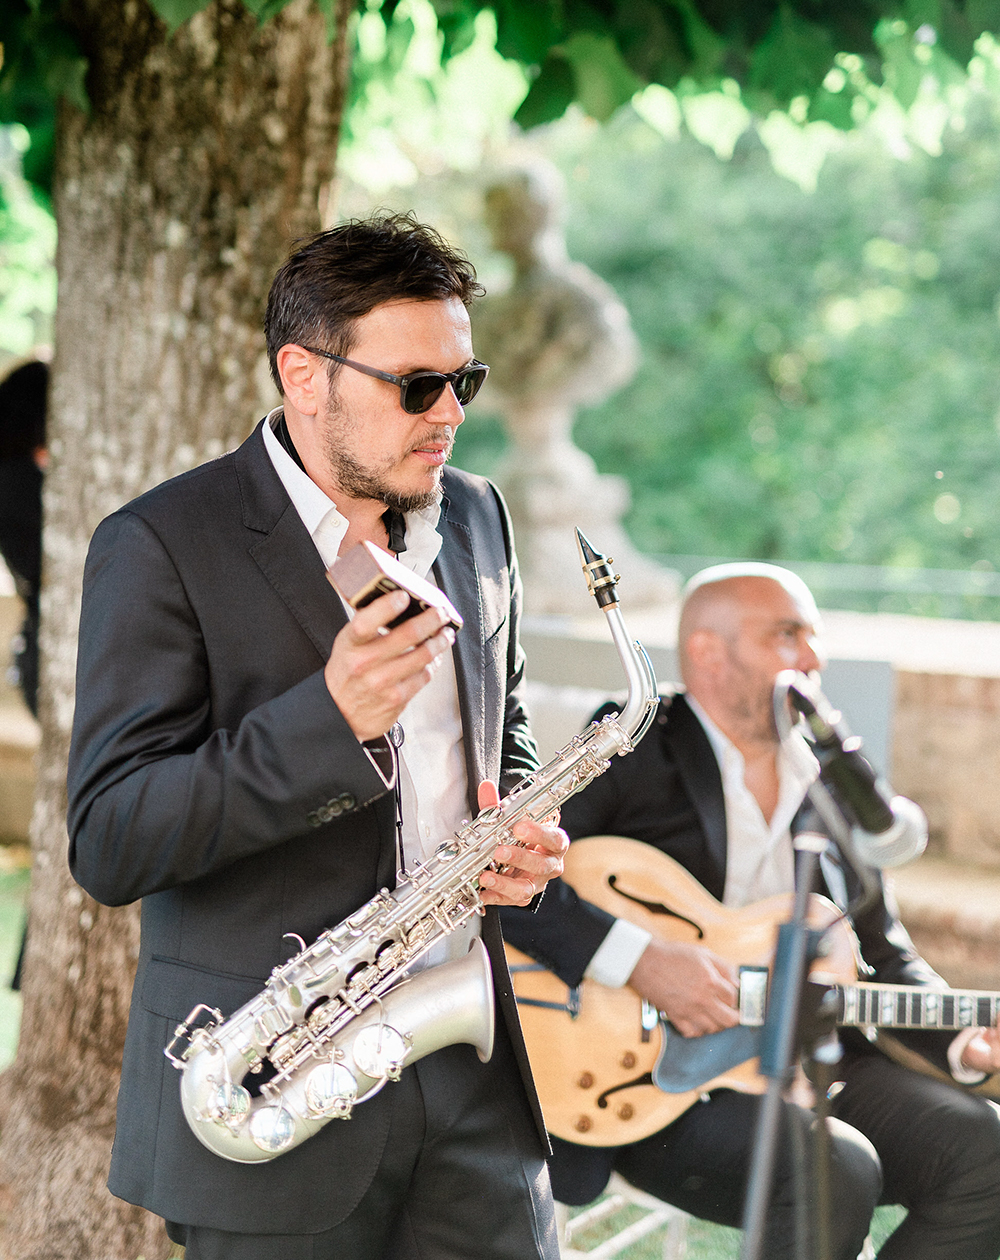 Wedding music for weddings in Italy